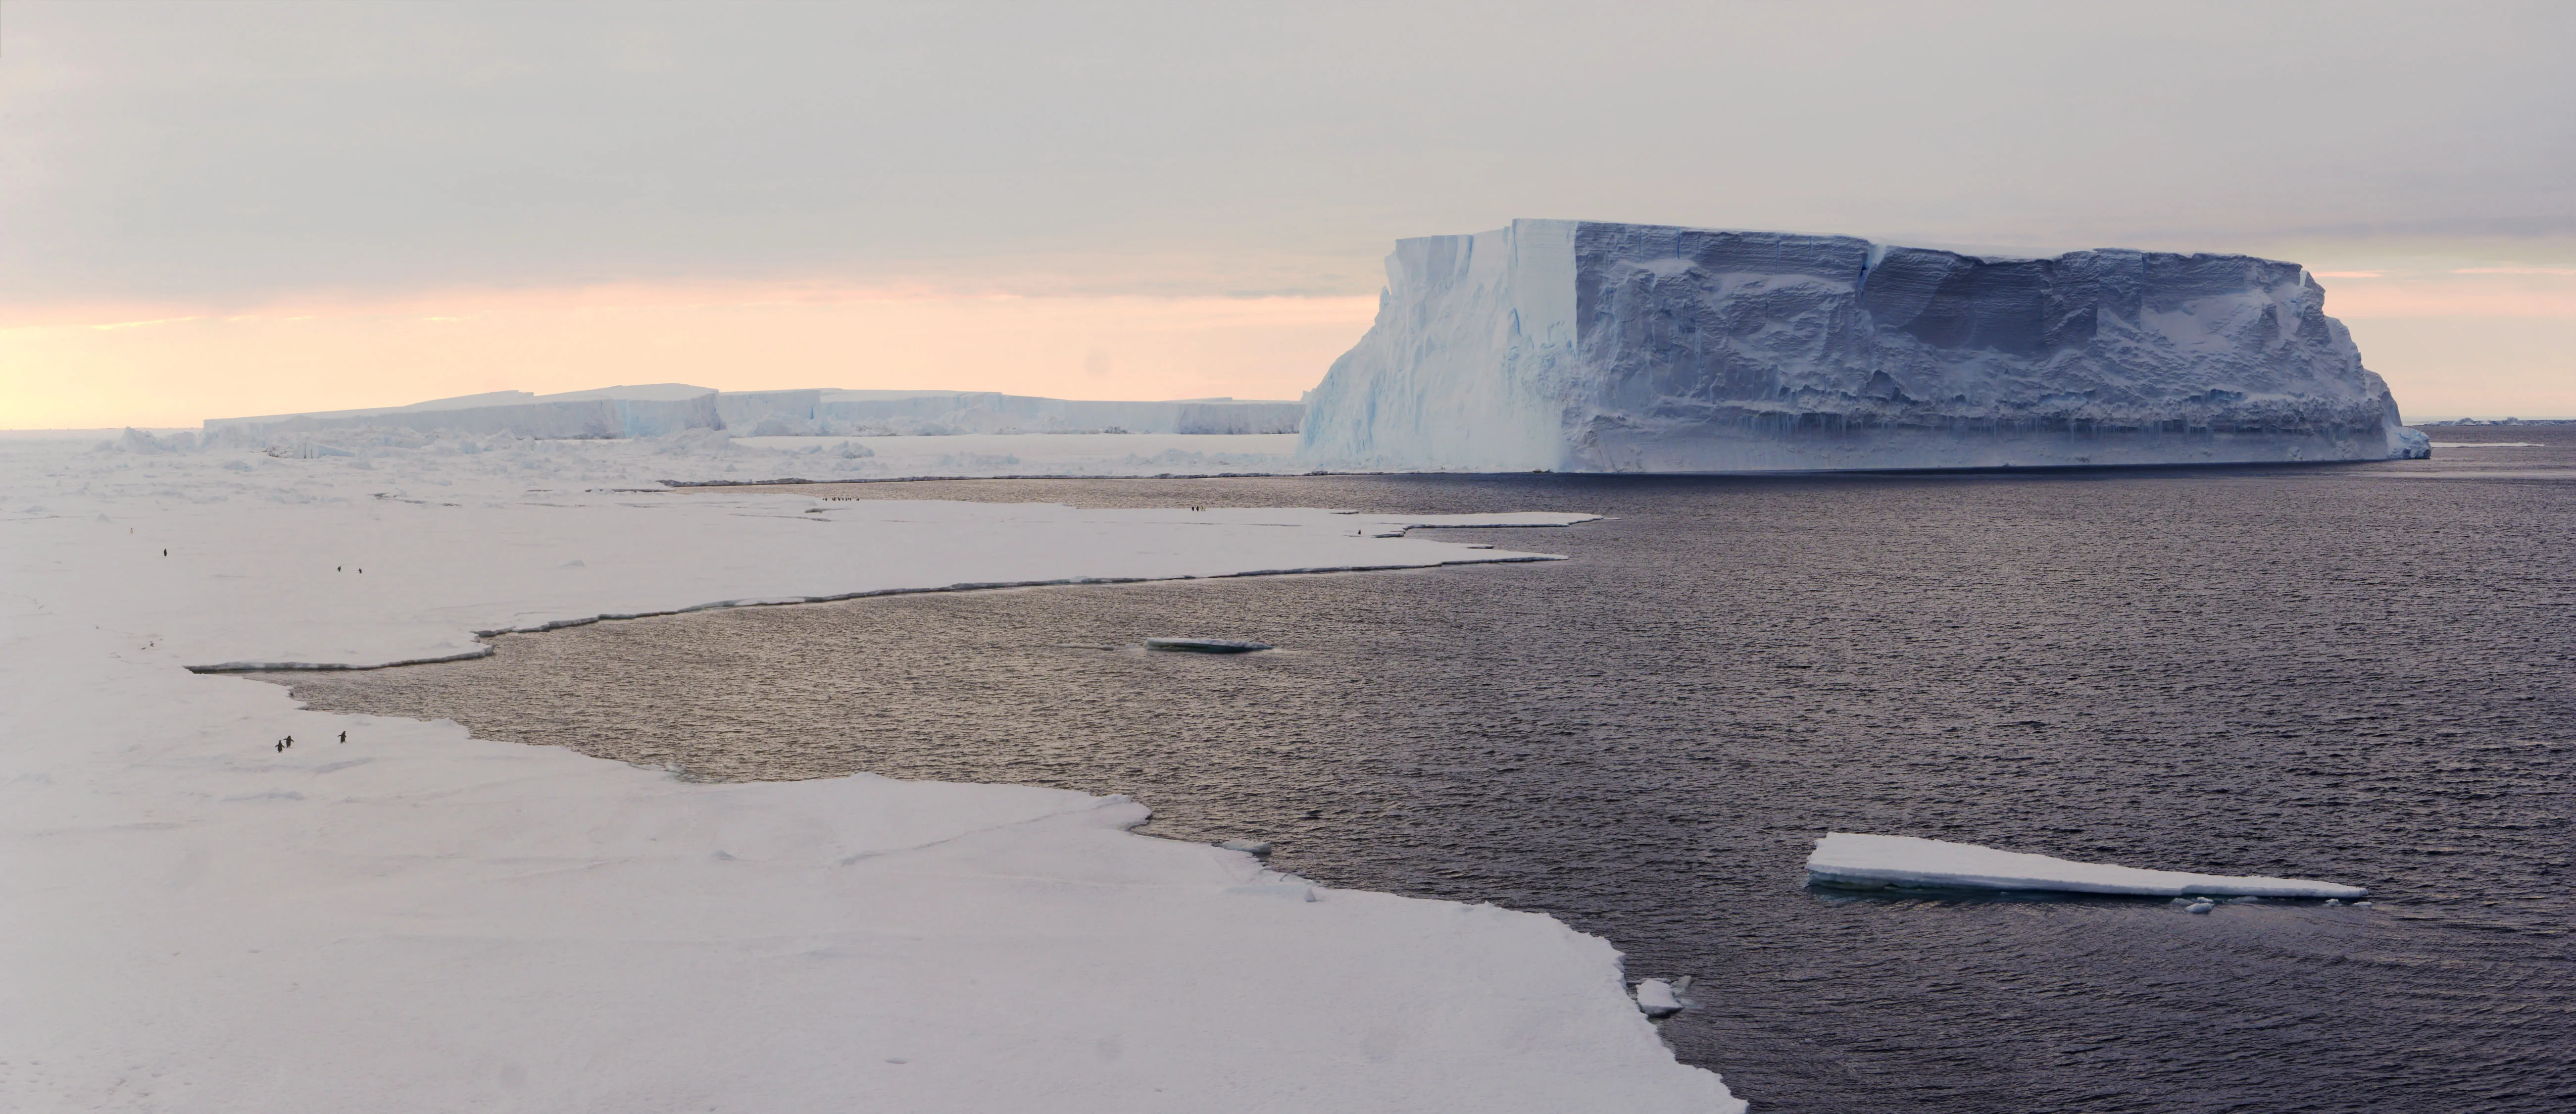 A panoramic photo of a gigantic tabluar iceberg surrounded by ice and water, with small groups of penguins.